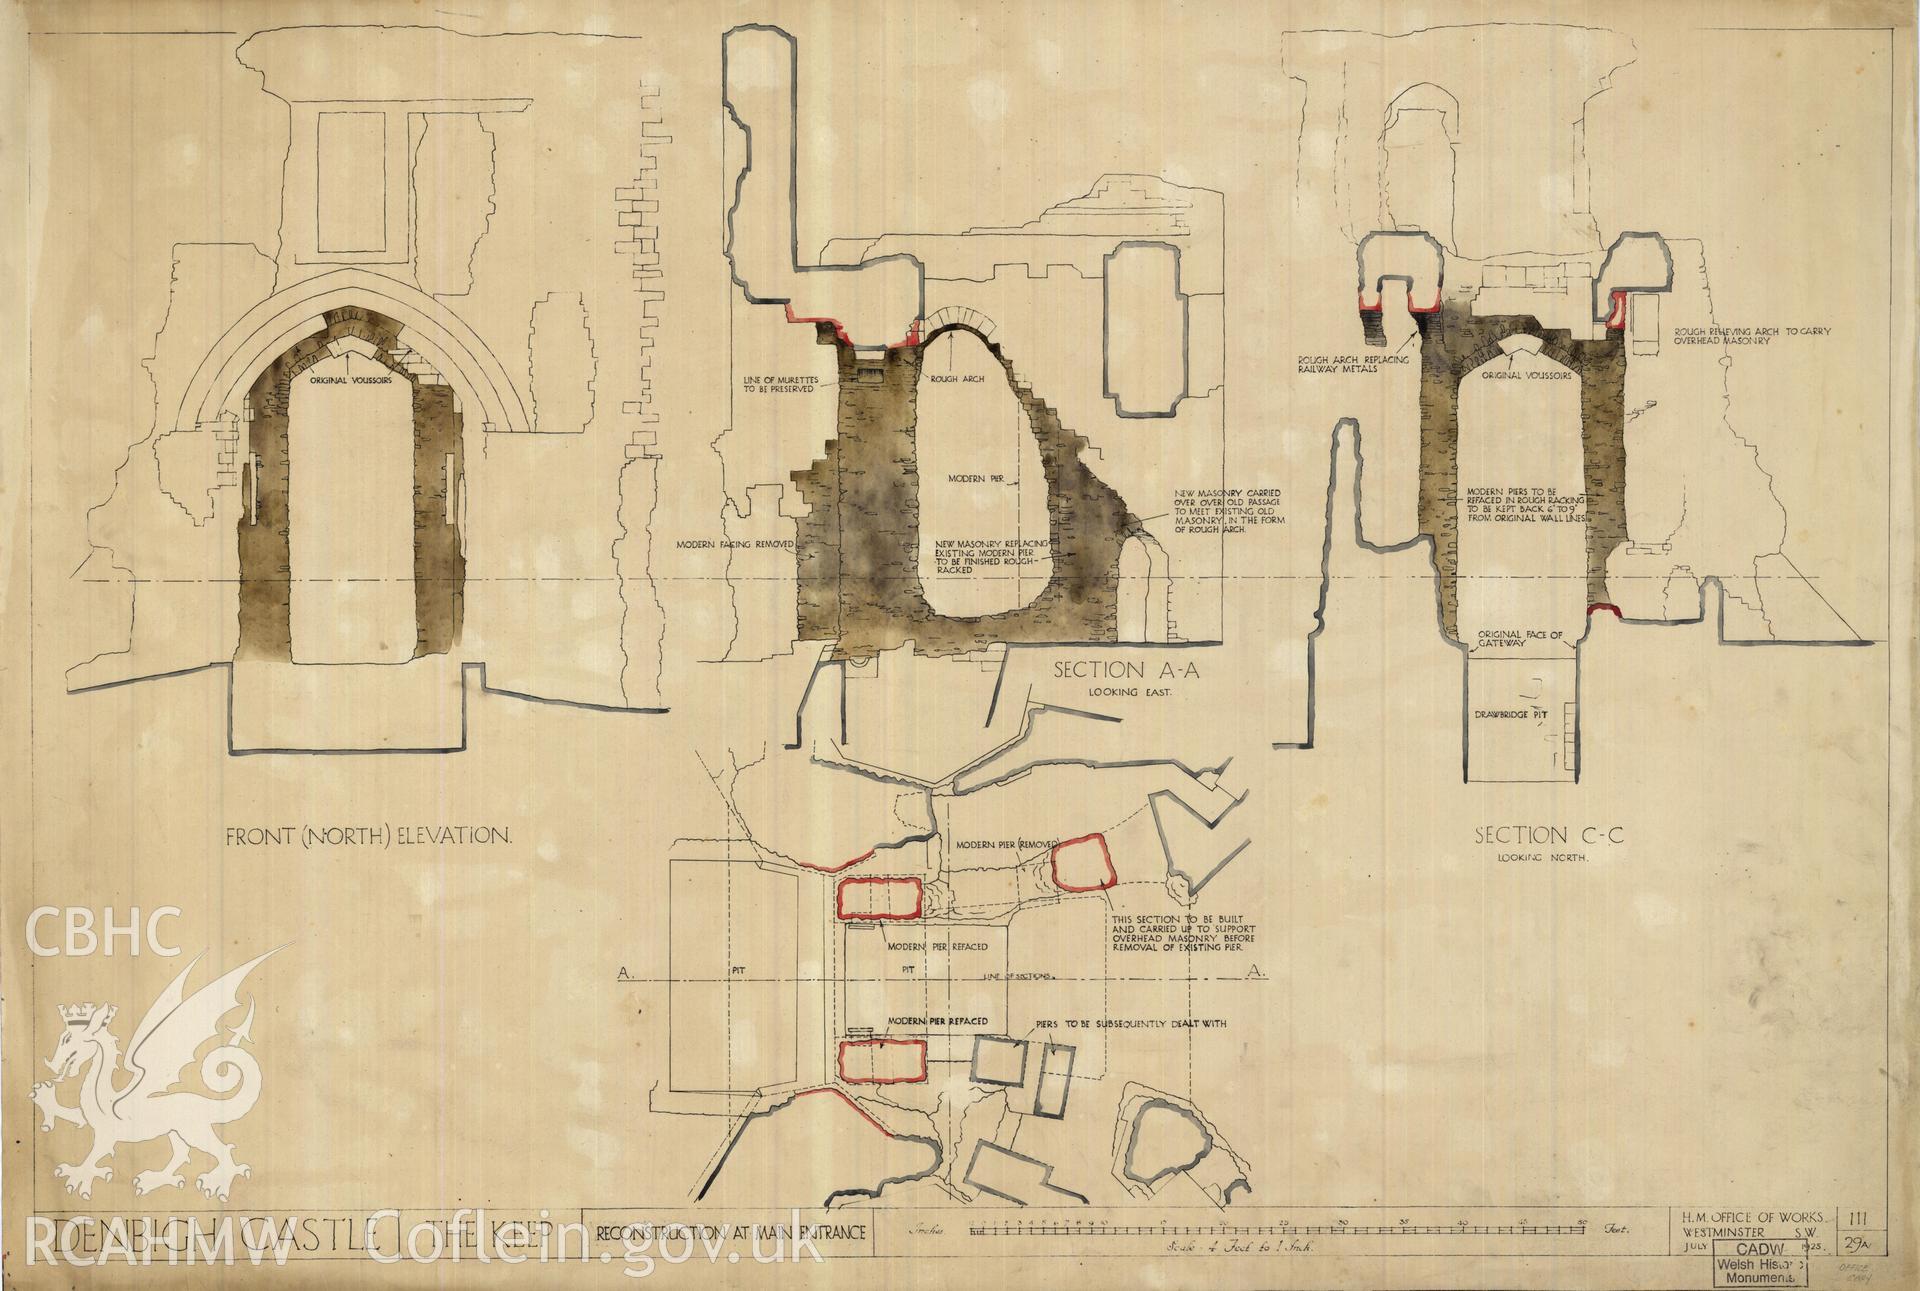 Cadw guardianship monument drawing of Denbigh Castle. Gatehouse, piers removed/refaced. Cadw Ref. No:111/29A1. Scale 1:48.